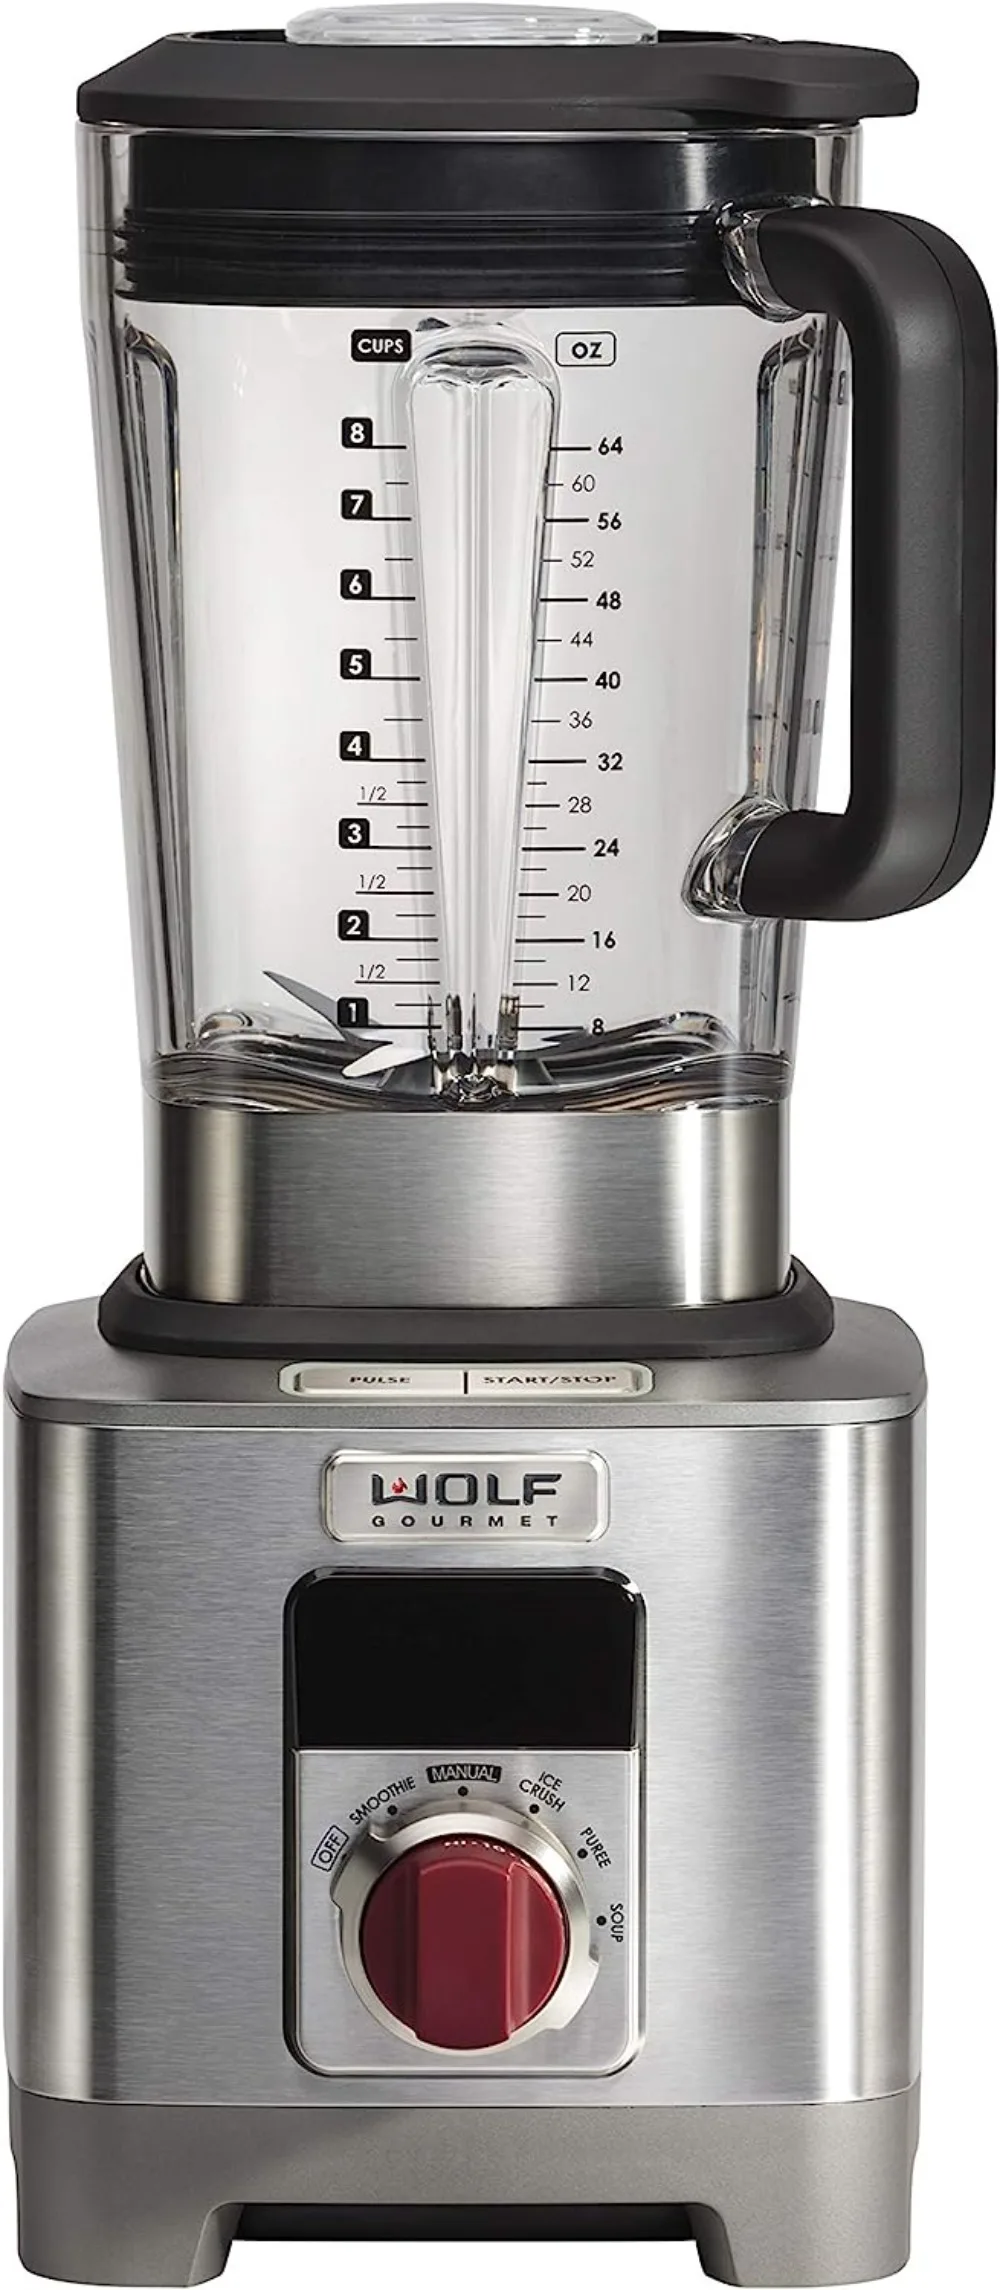 

Wolf Gourmet High-Performance Blender, 64 oz Jar, 4 program settings, 12.5 AMPS, Blends Food, Shakes and Smoothies